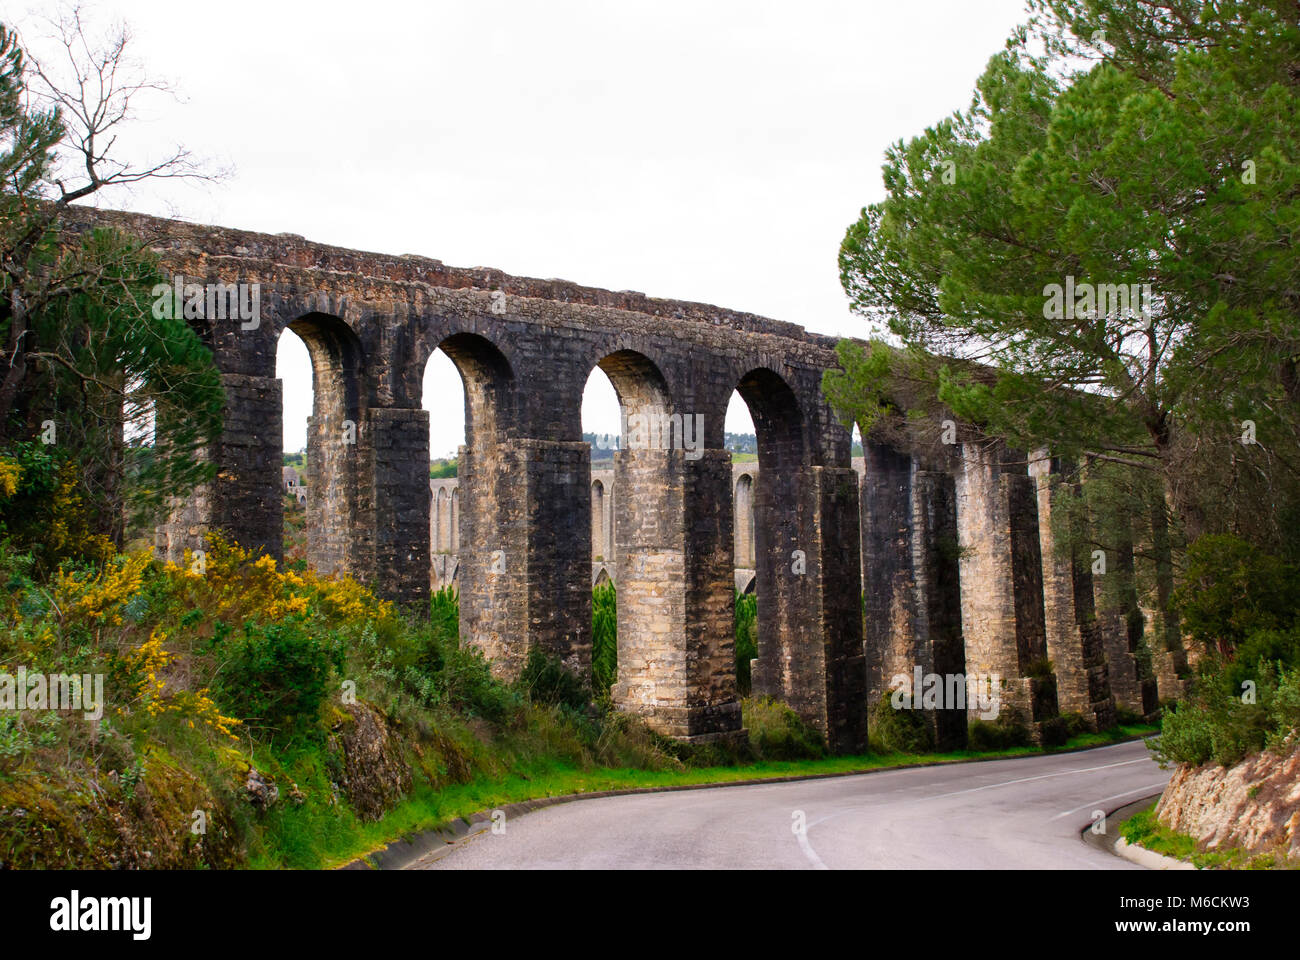 Arches of aqueduct, Tomar, Portugal Stock Photo